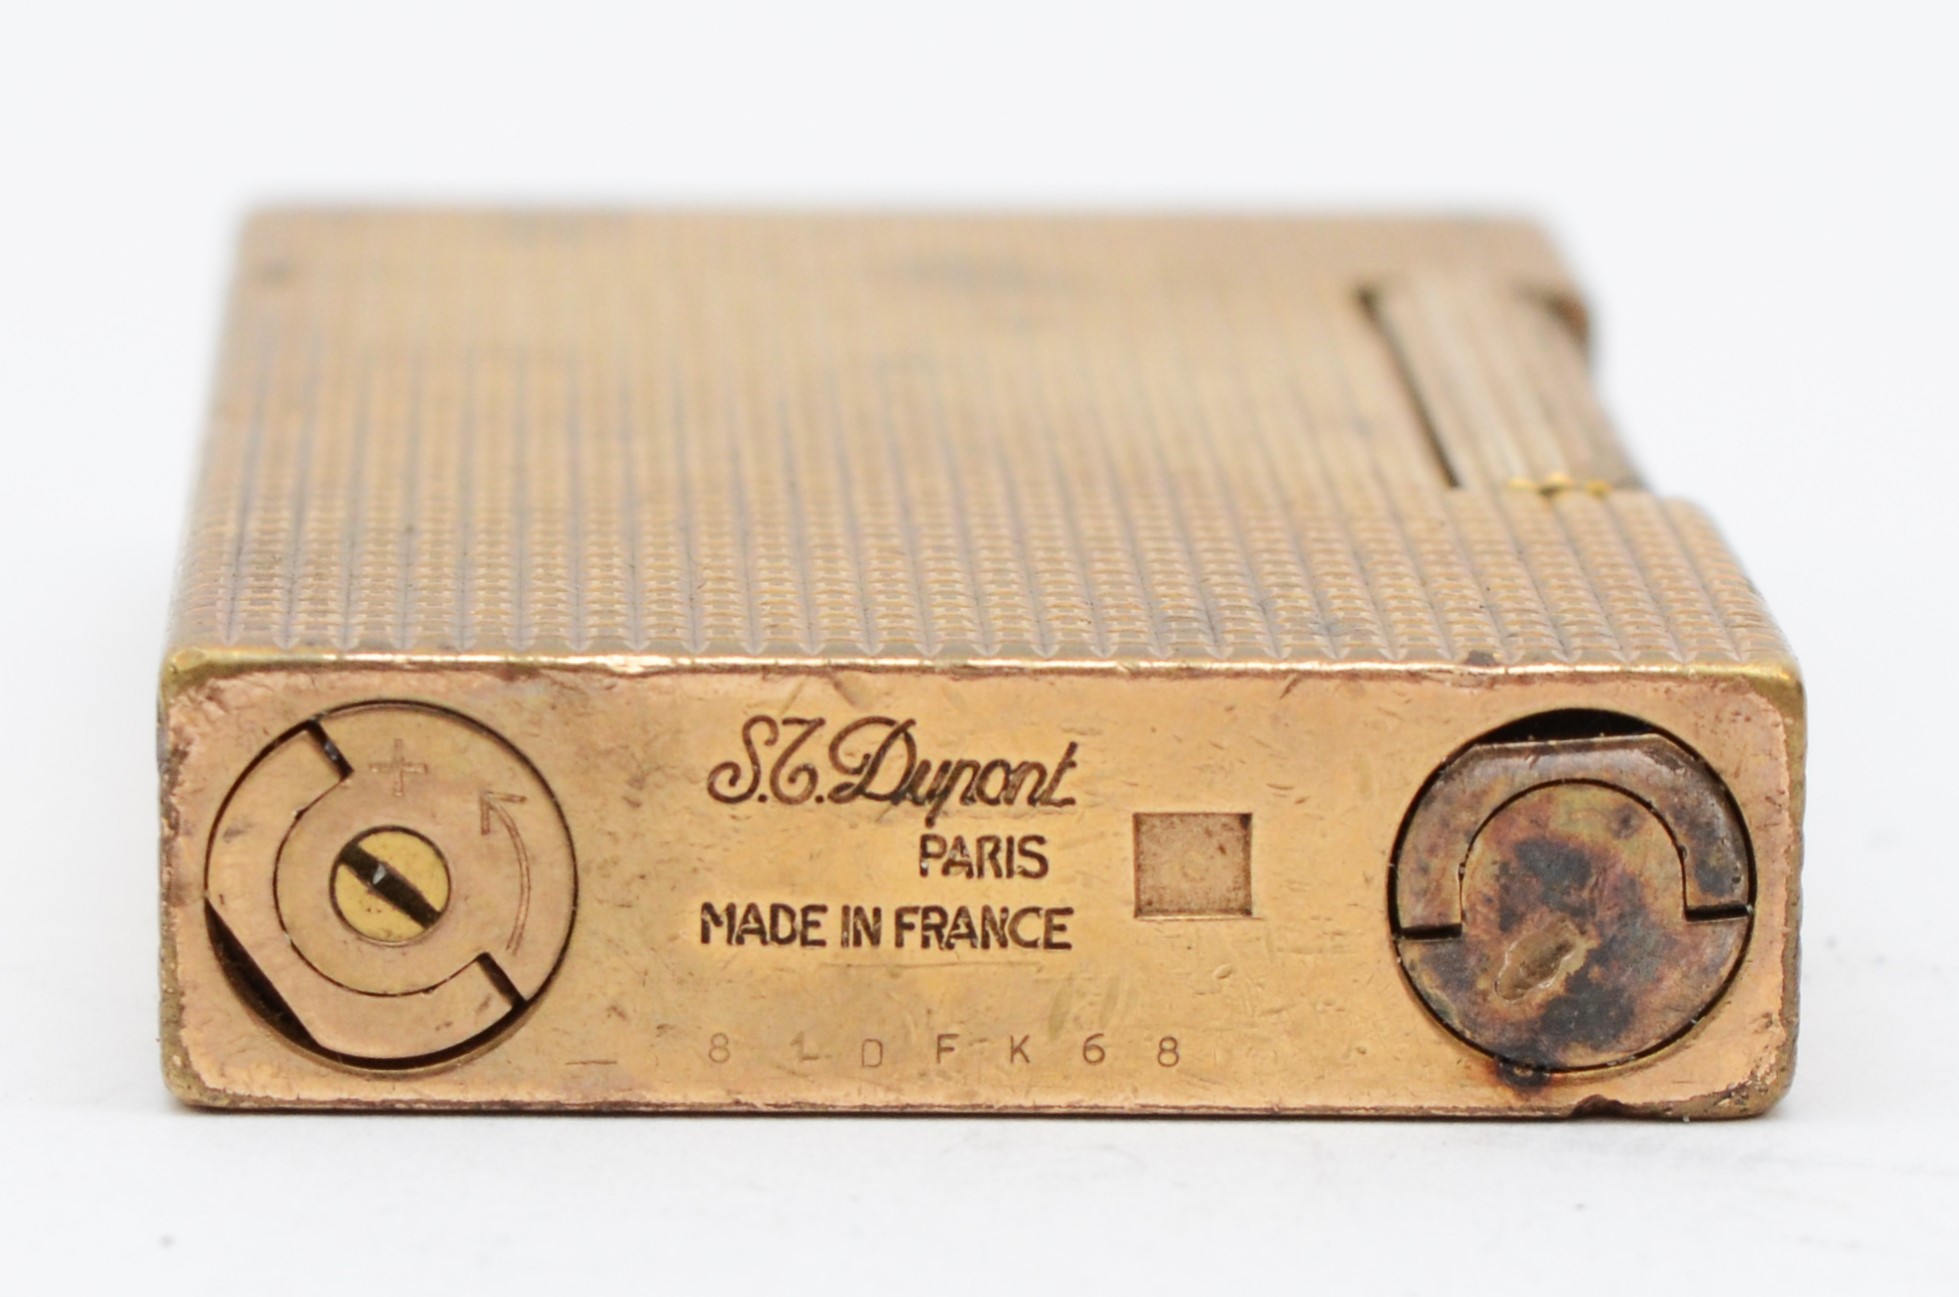 S.T. Dupont, a gold plated gas lighter, serial number 81DFK68. - Image 3 of 3